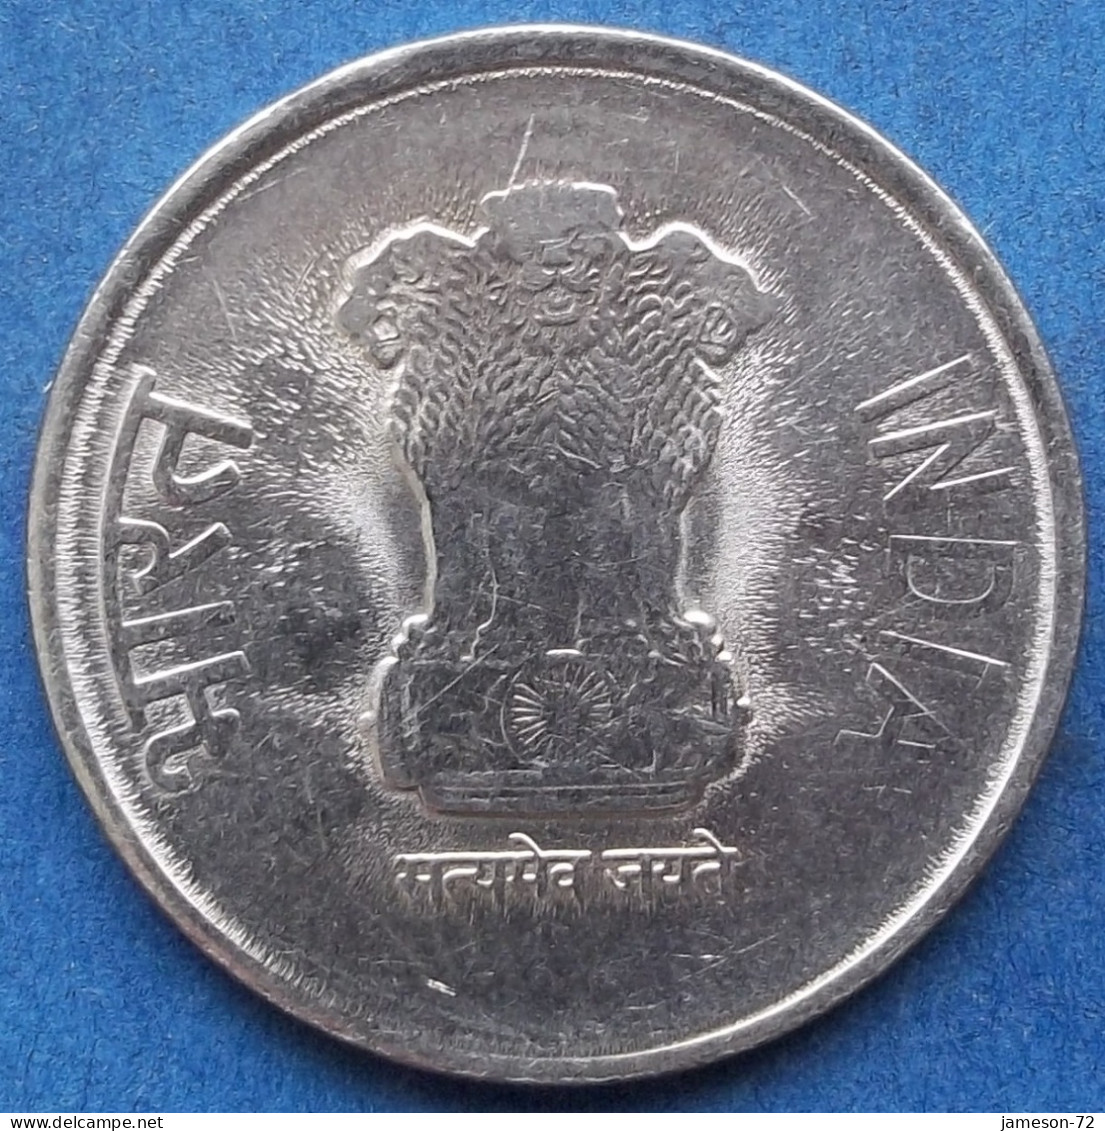 INDIA - 2 Rupees 2018 "Lotus Flowers" KM# 395 Republic Decimal Coinage (1957) - Edelweiss Coins - Georgien